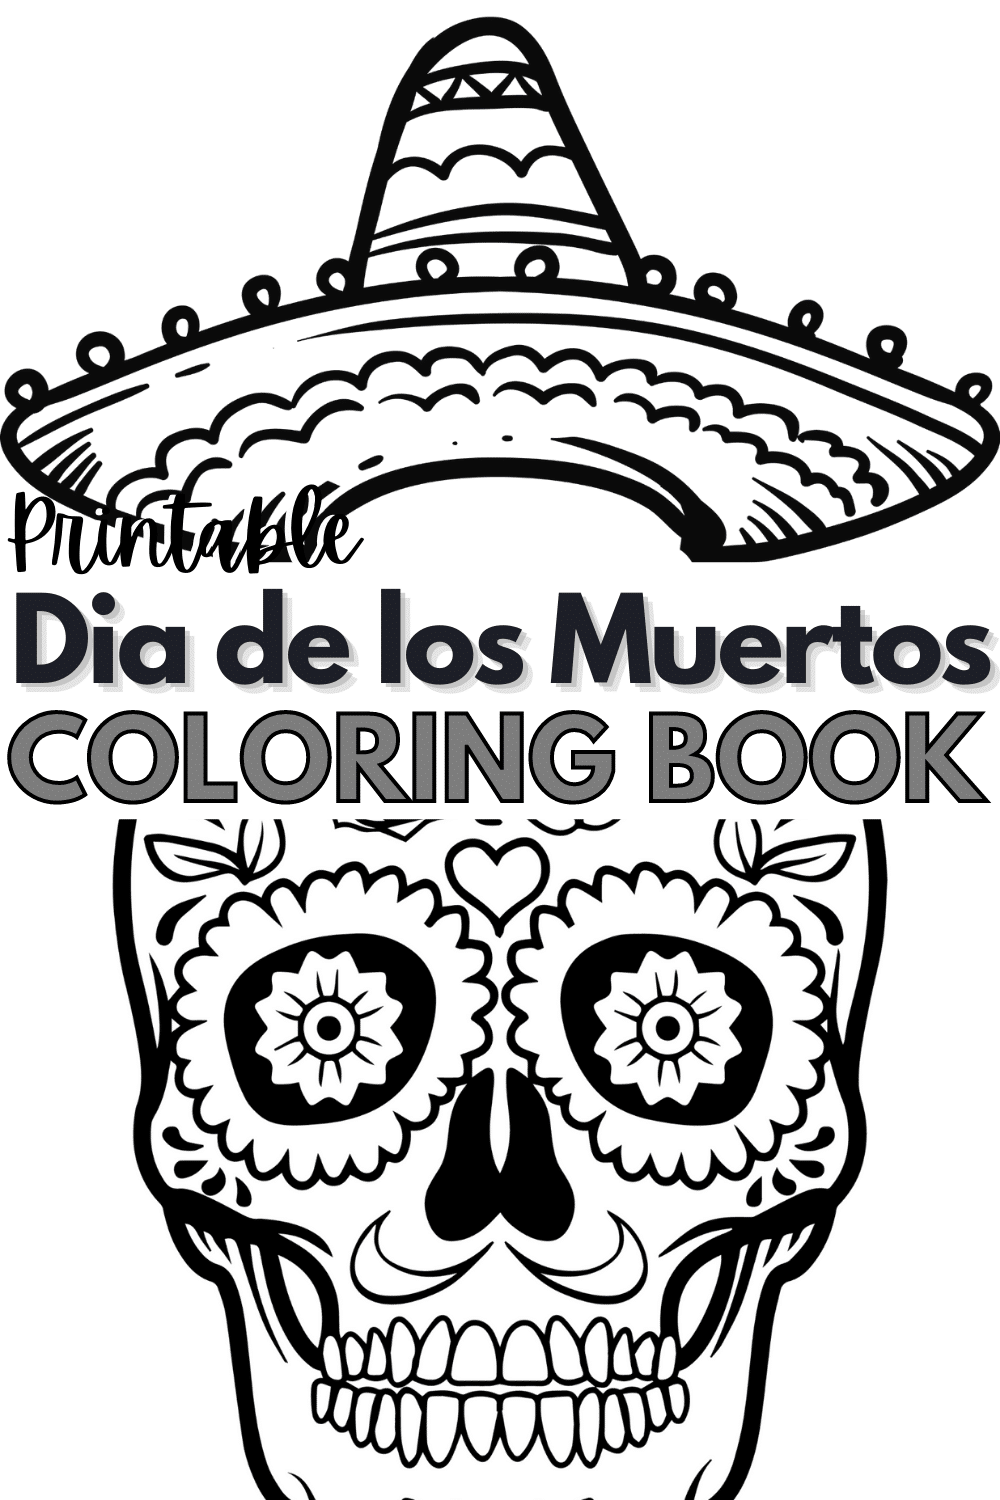 What better way to celebrate this two-day holiday than with this Dia De Los Muertos Coloring Book for the kids. They'll have a blast coloring! #diadelosmuertos #coloringbook #freeprintables #forkids via @wondermomwannab